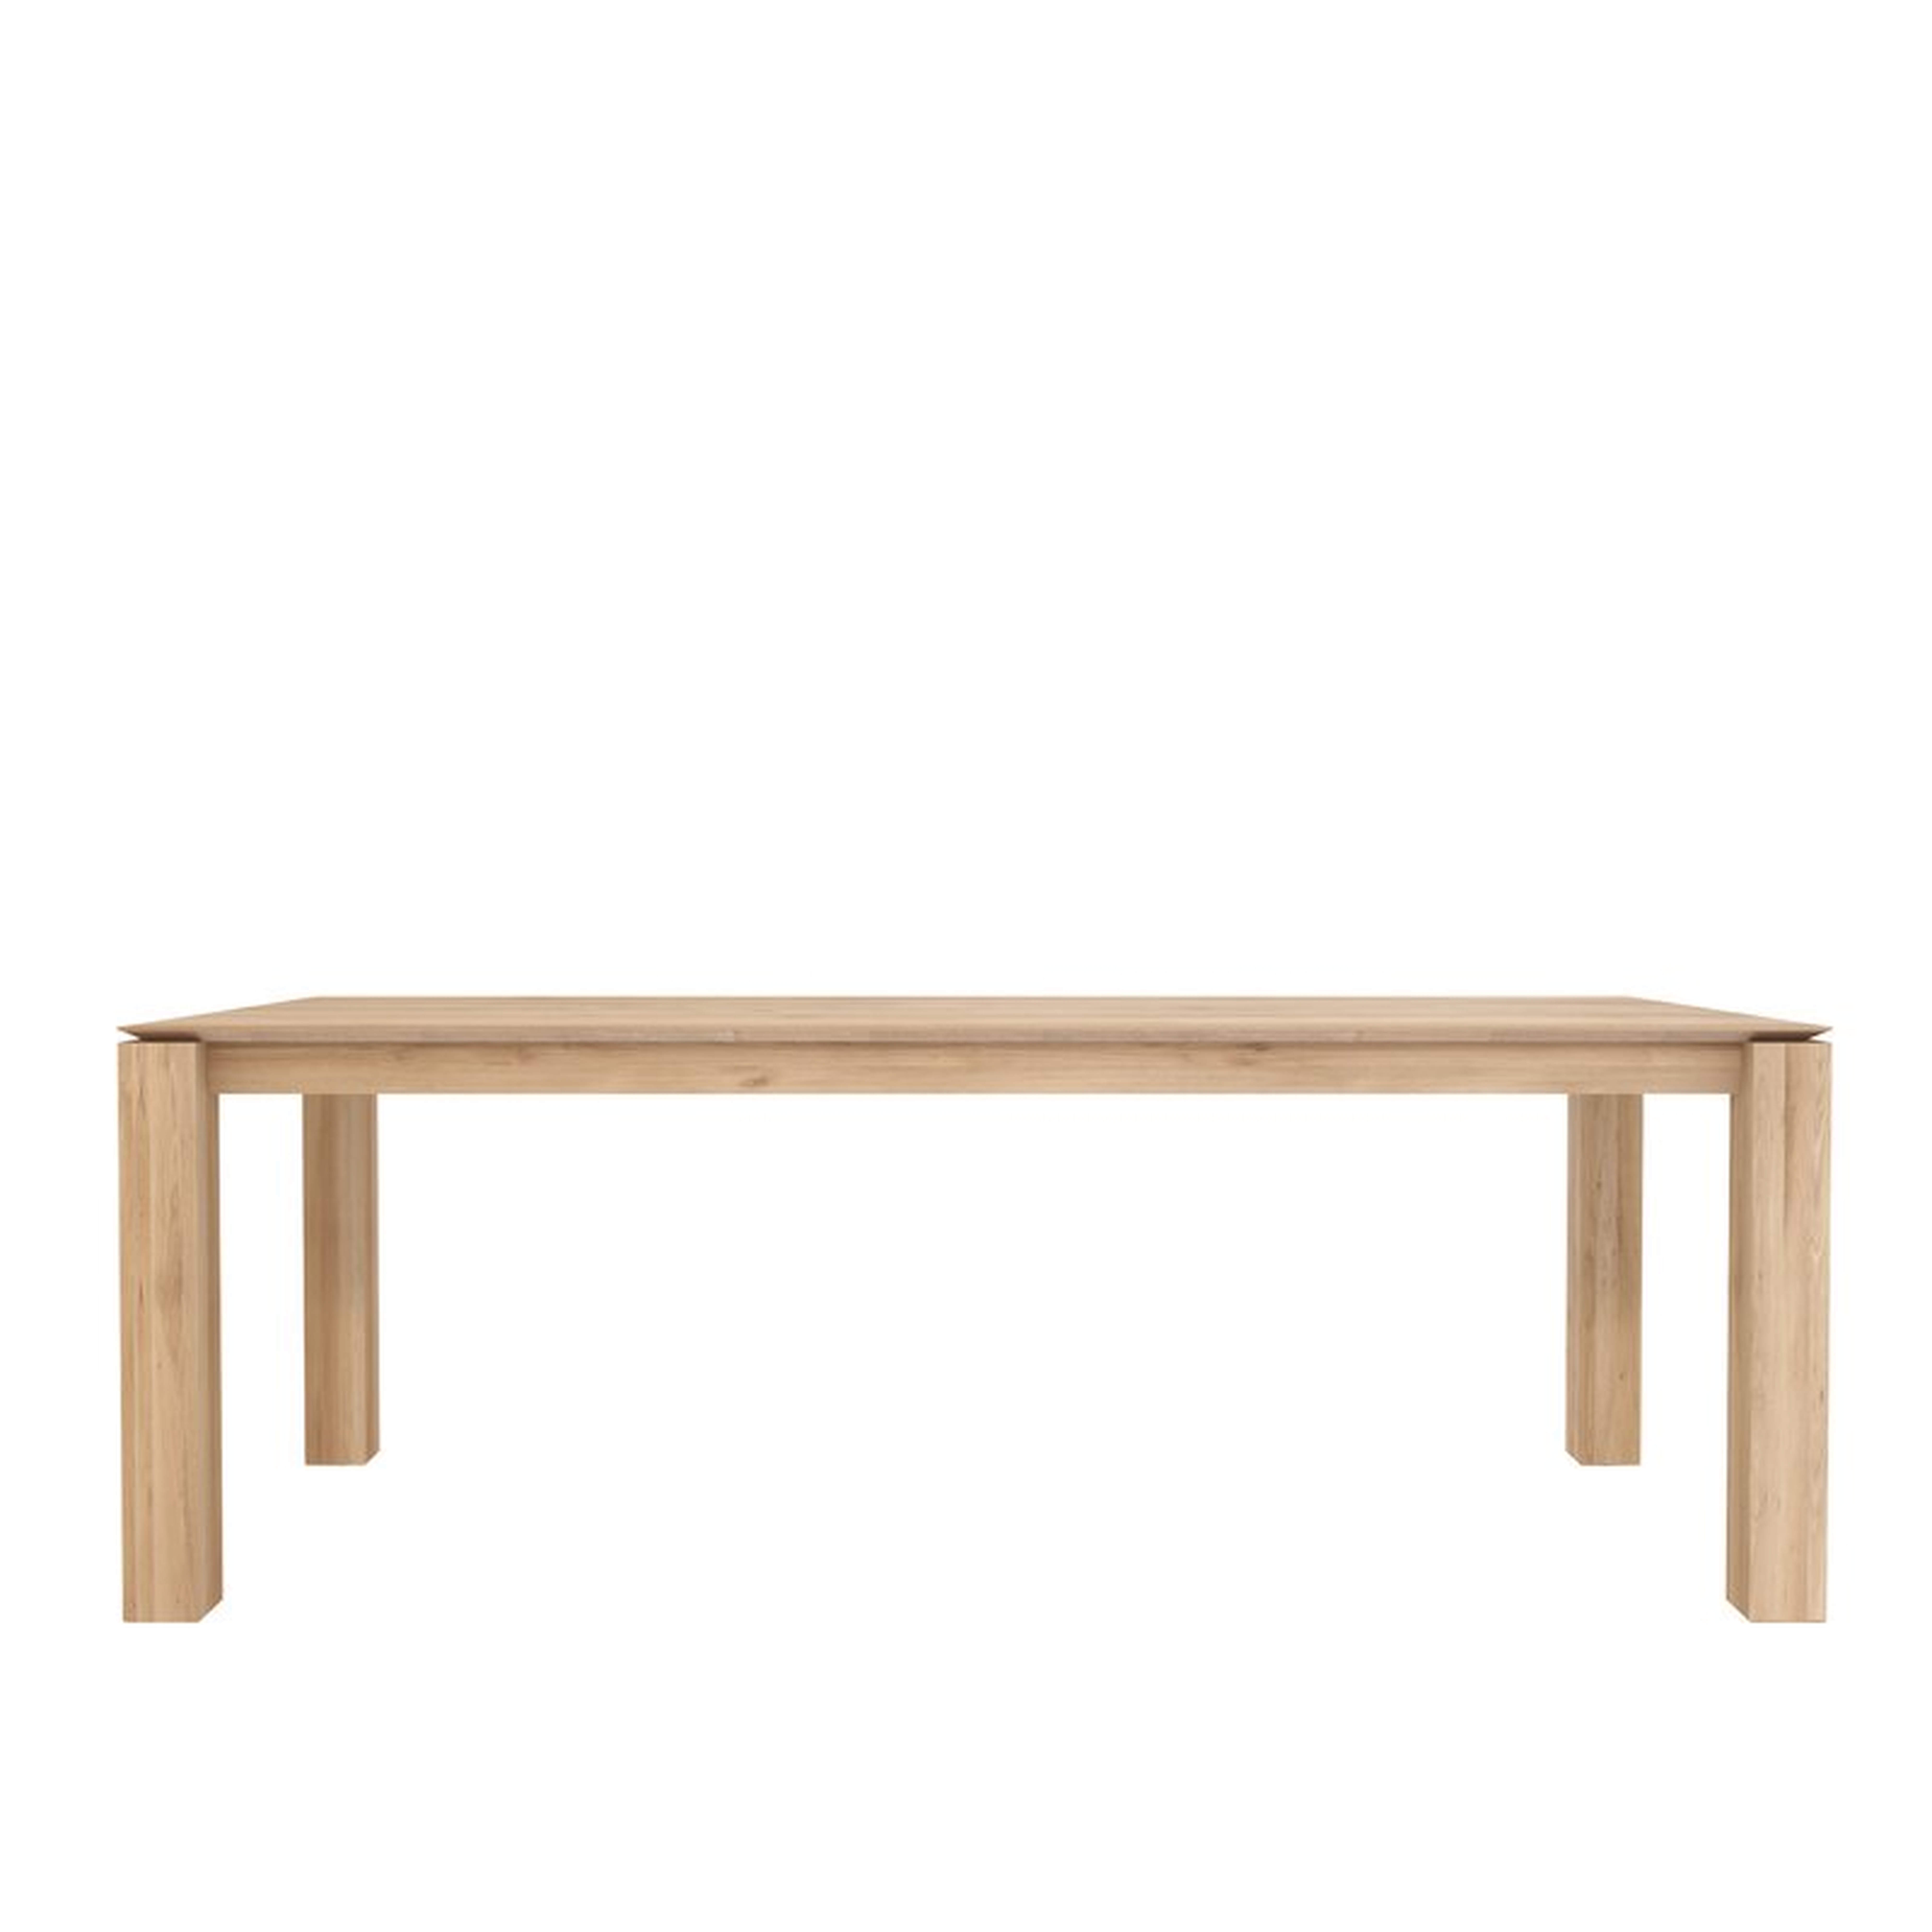 Slice Solid Wood Dining Table - Perigold